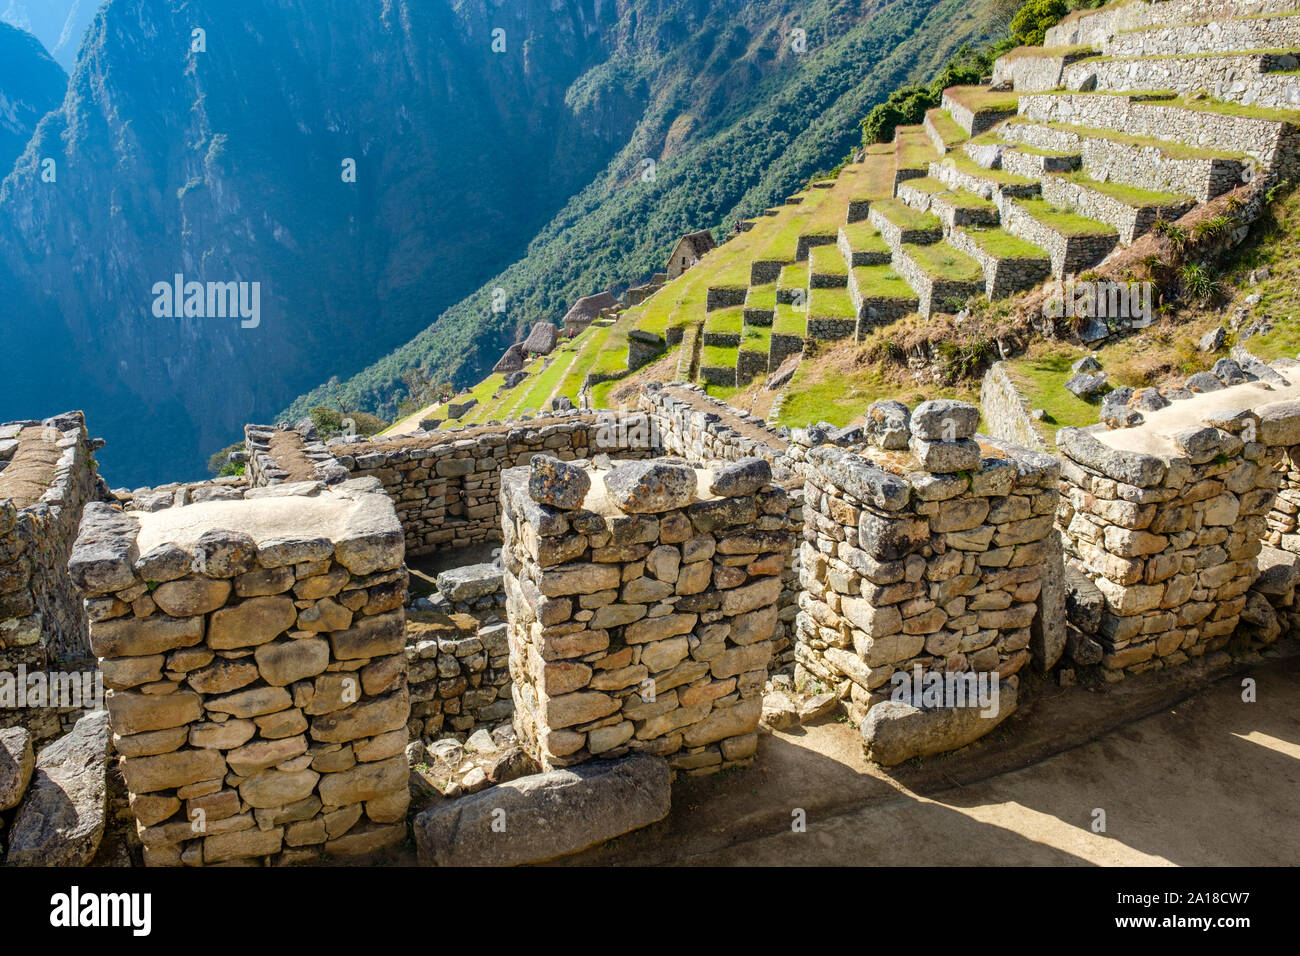 Ancient city ruins, Machu Picchu sunrise, Sacred Valley of the Incas, Peru. Stone walls and agricultural terraces, Machu Pichu, early morning. Stock Photo